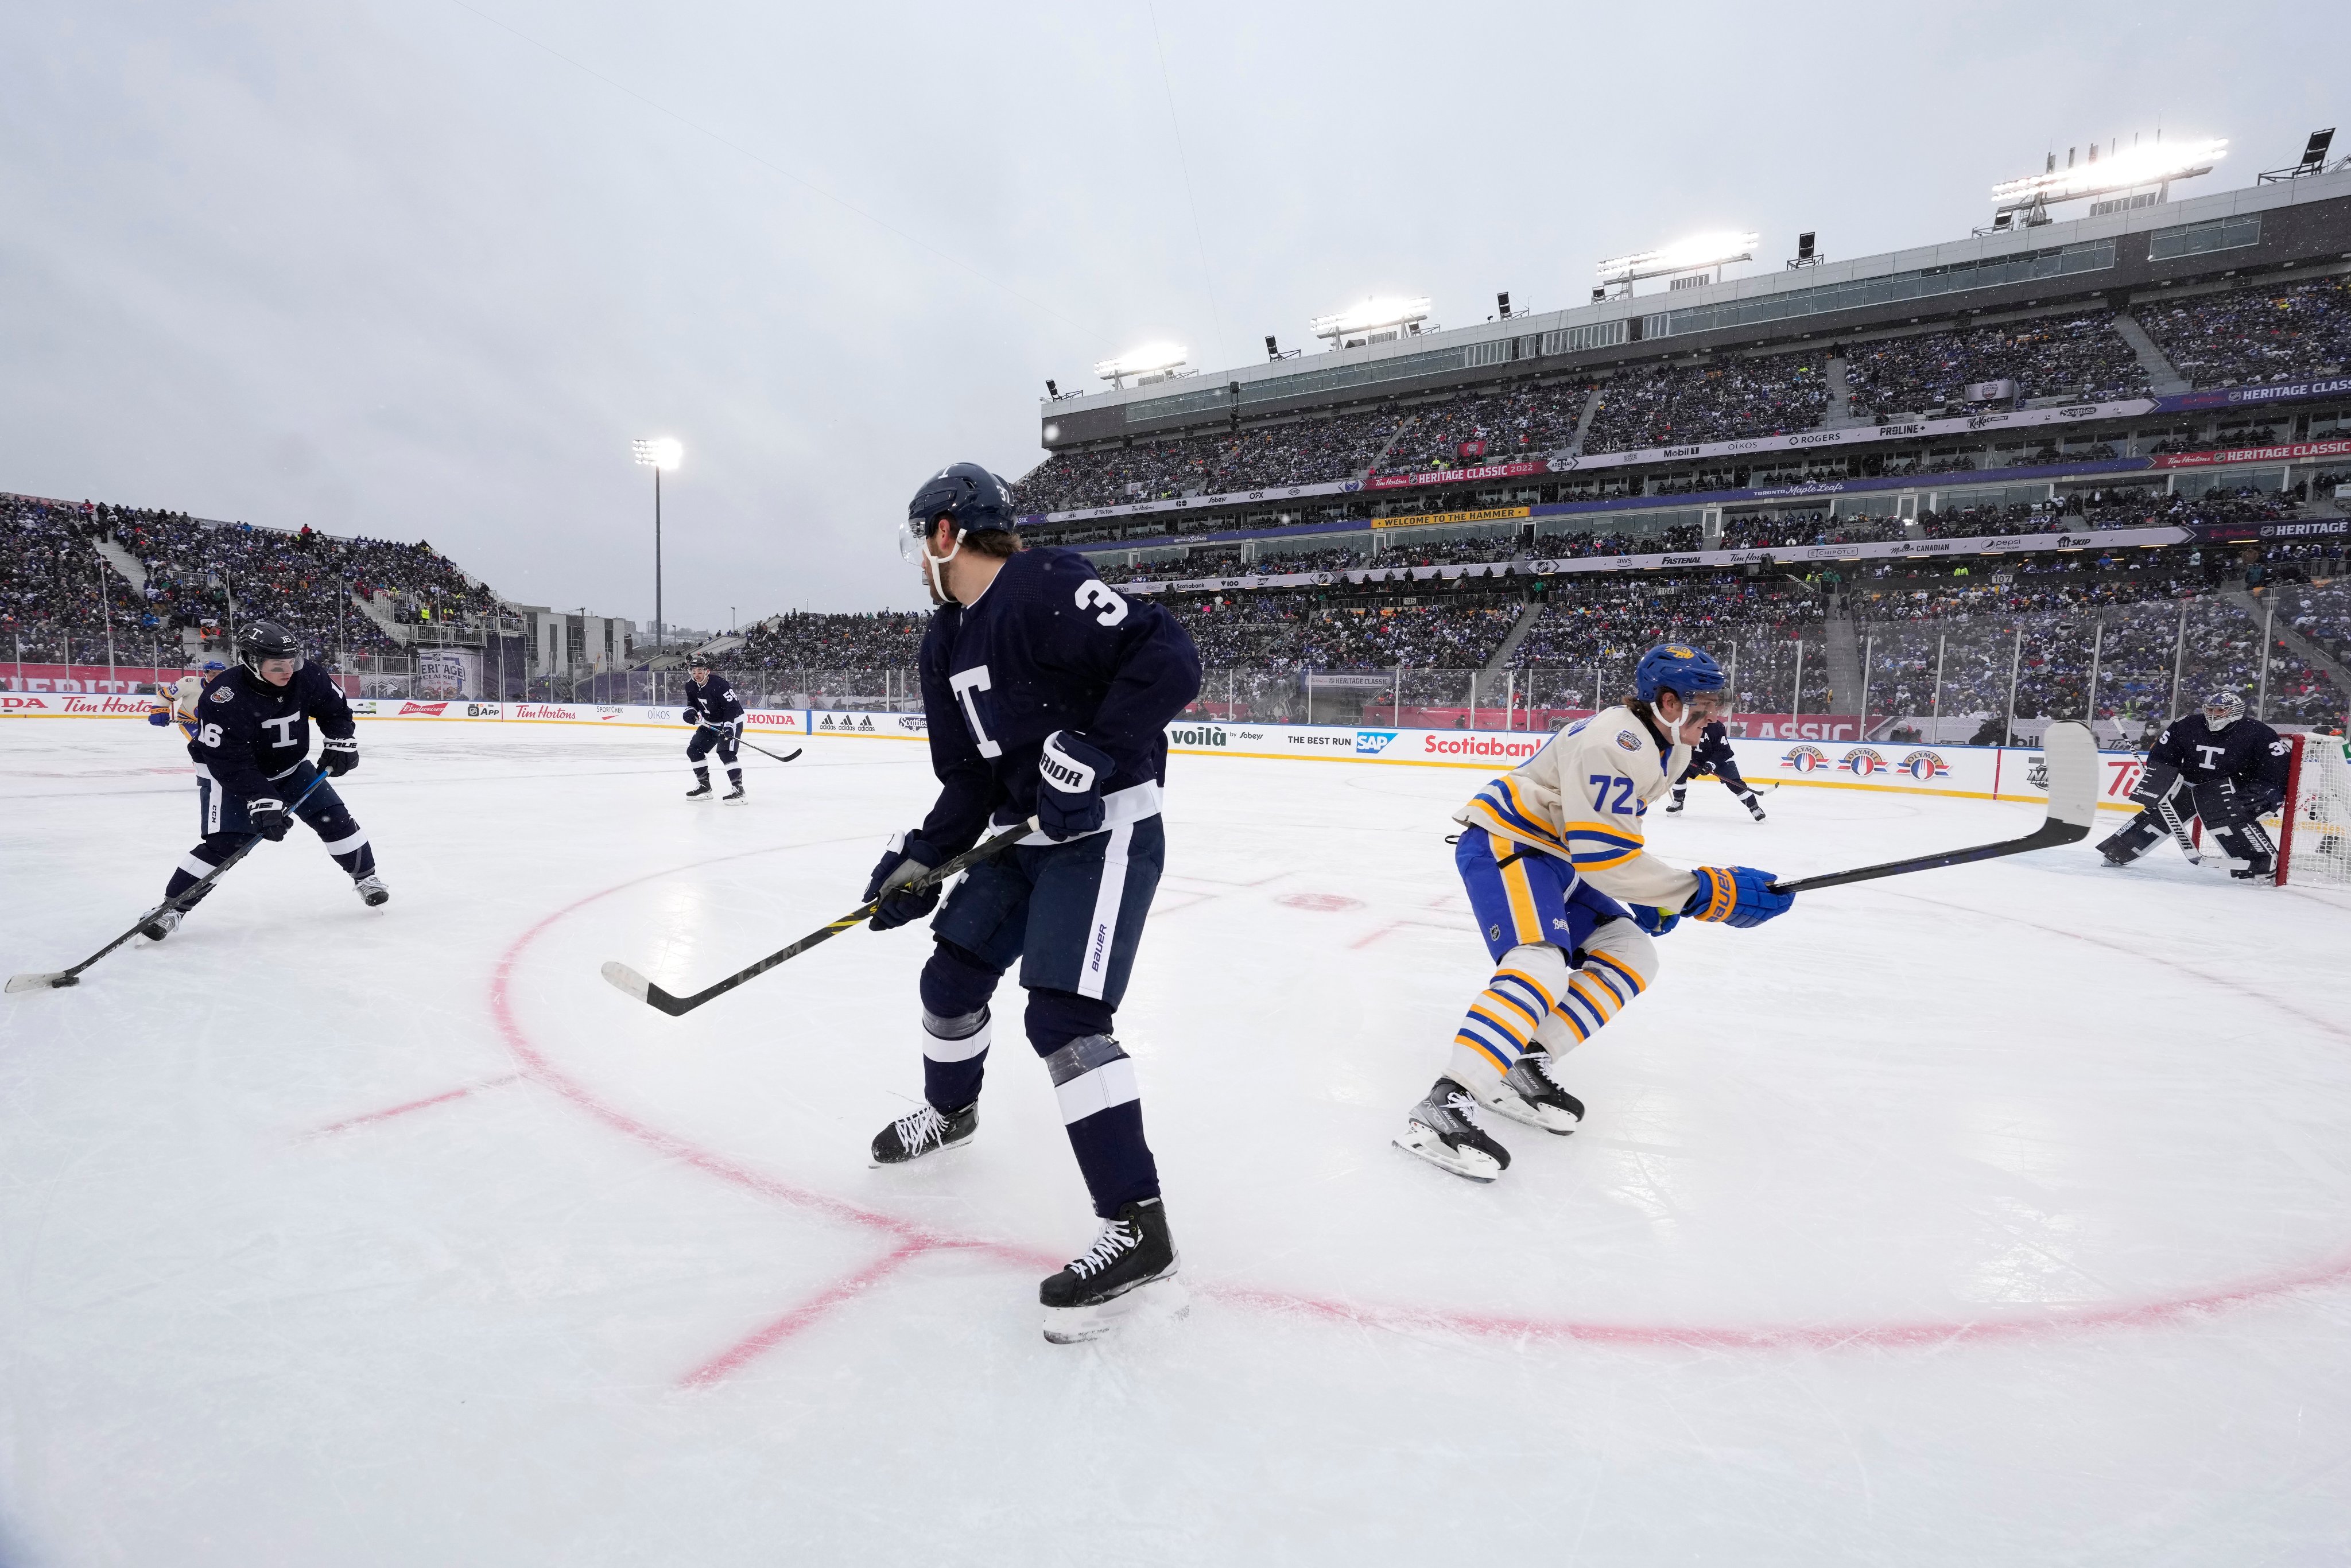 Hinostroza, Krebs lead Sabres over Maple Leafs in Heritage Classic